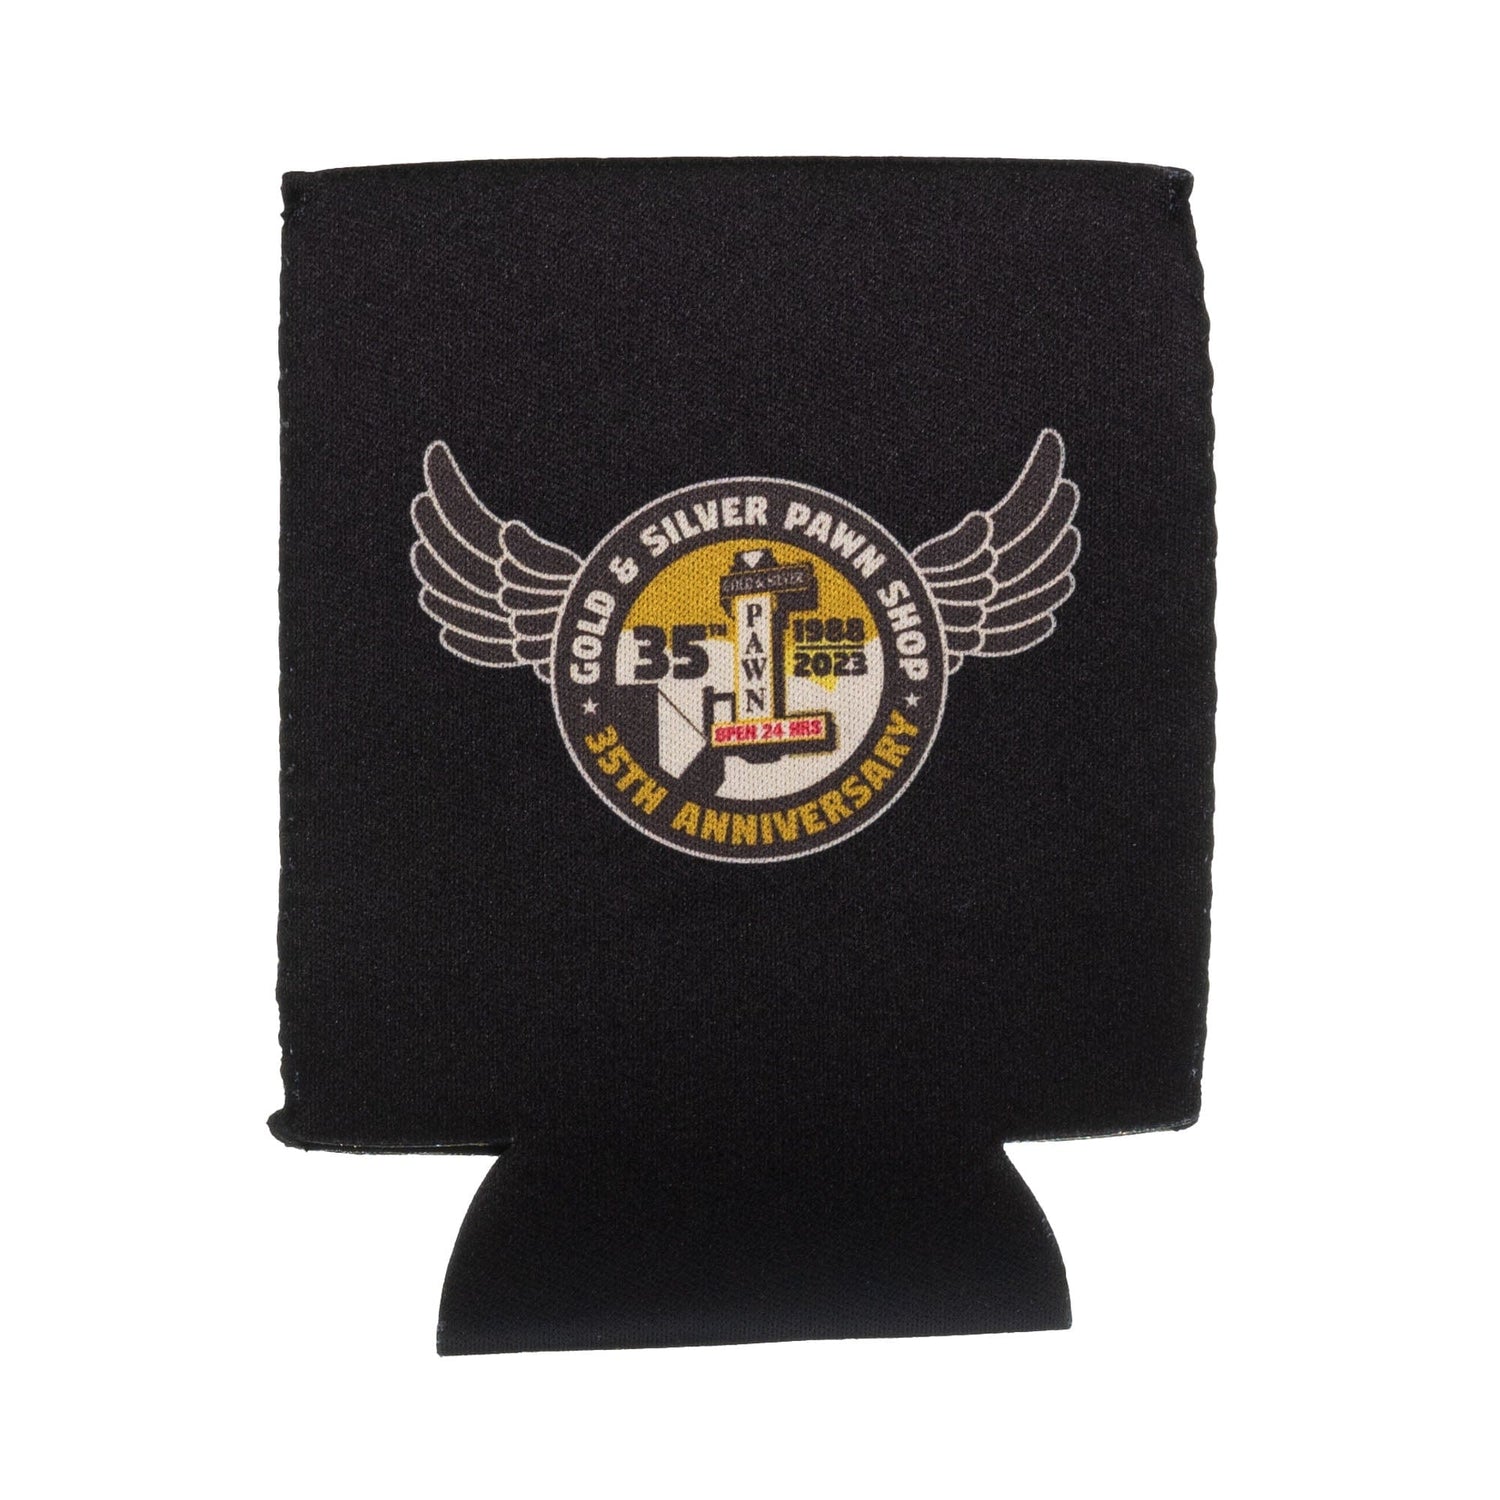 Gold & Silver Pawn Shop 35th Anniversary Cup Koozie ZOOM